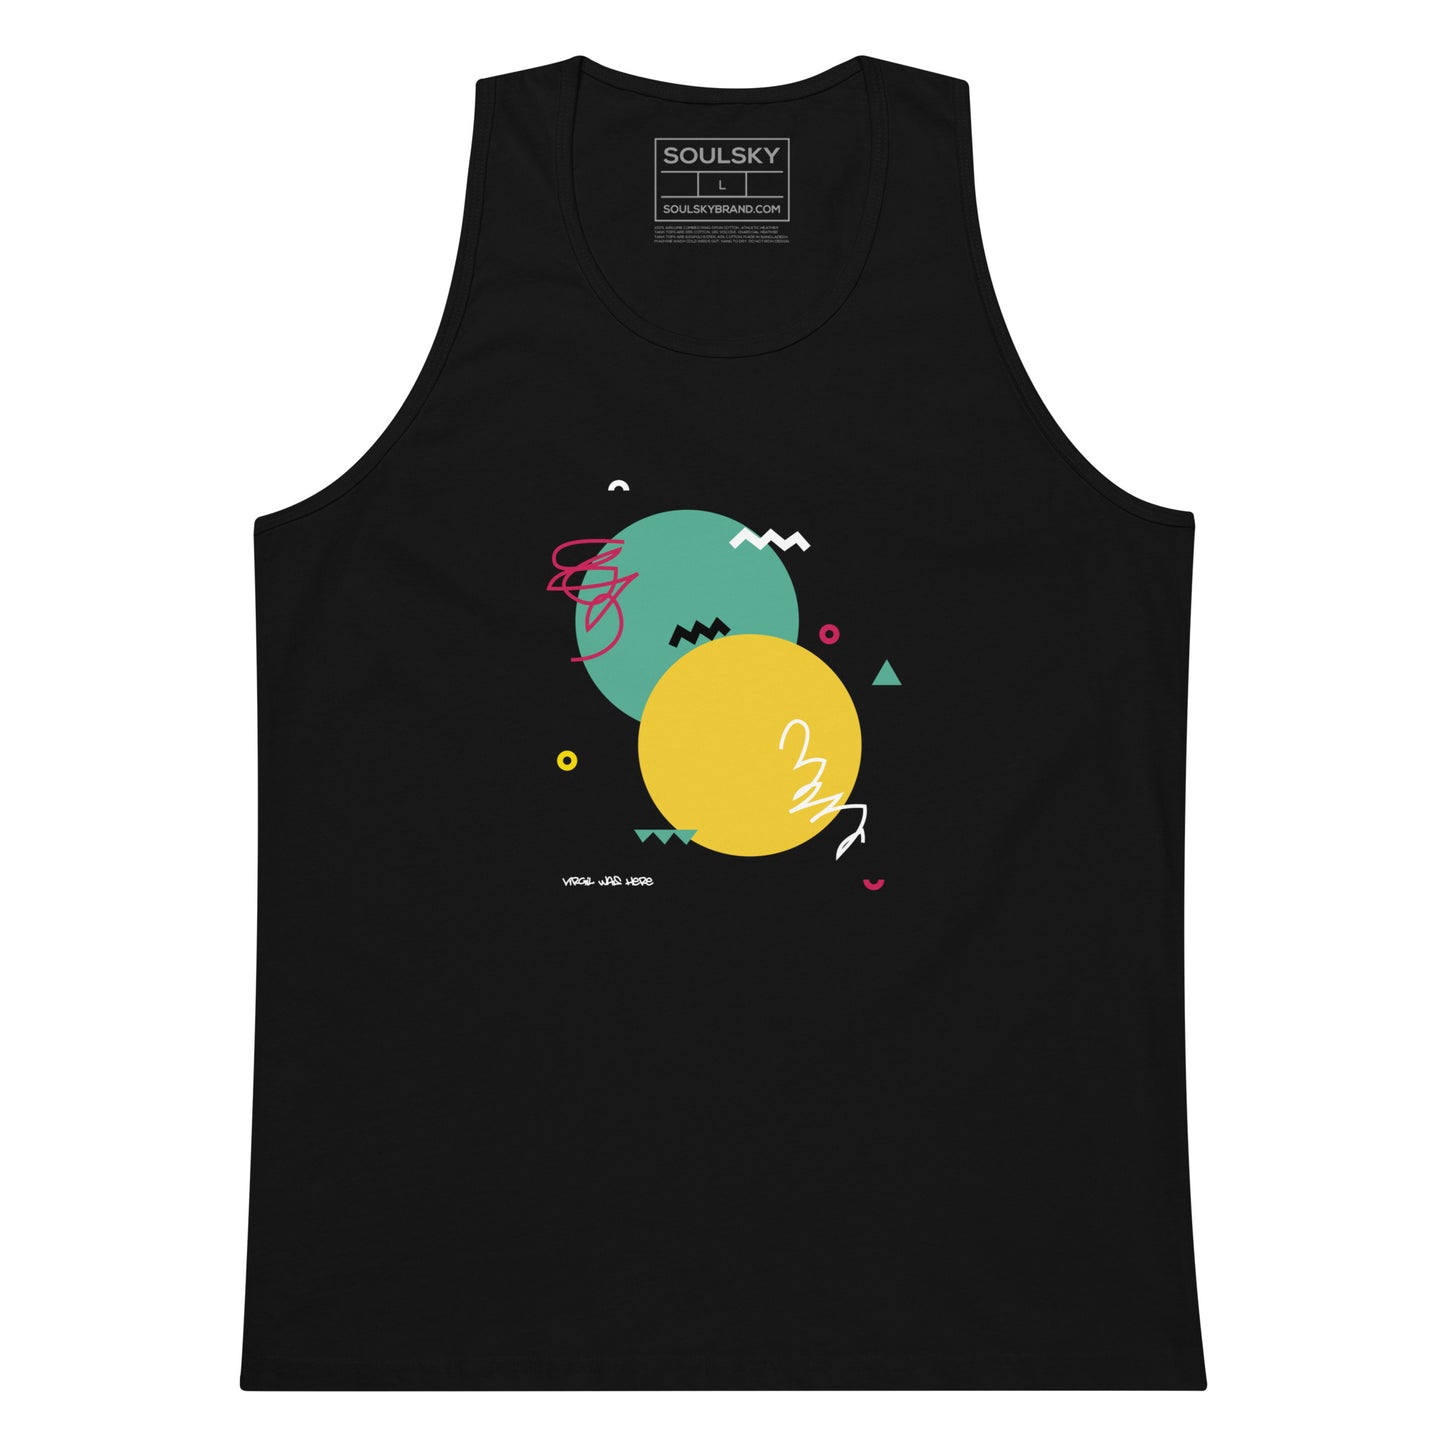 GIFTED Premium Tank Top